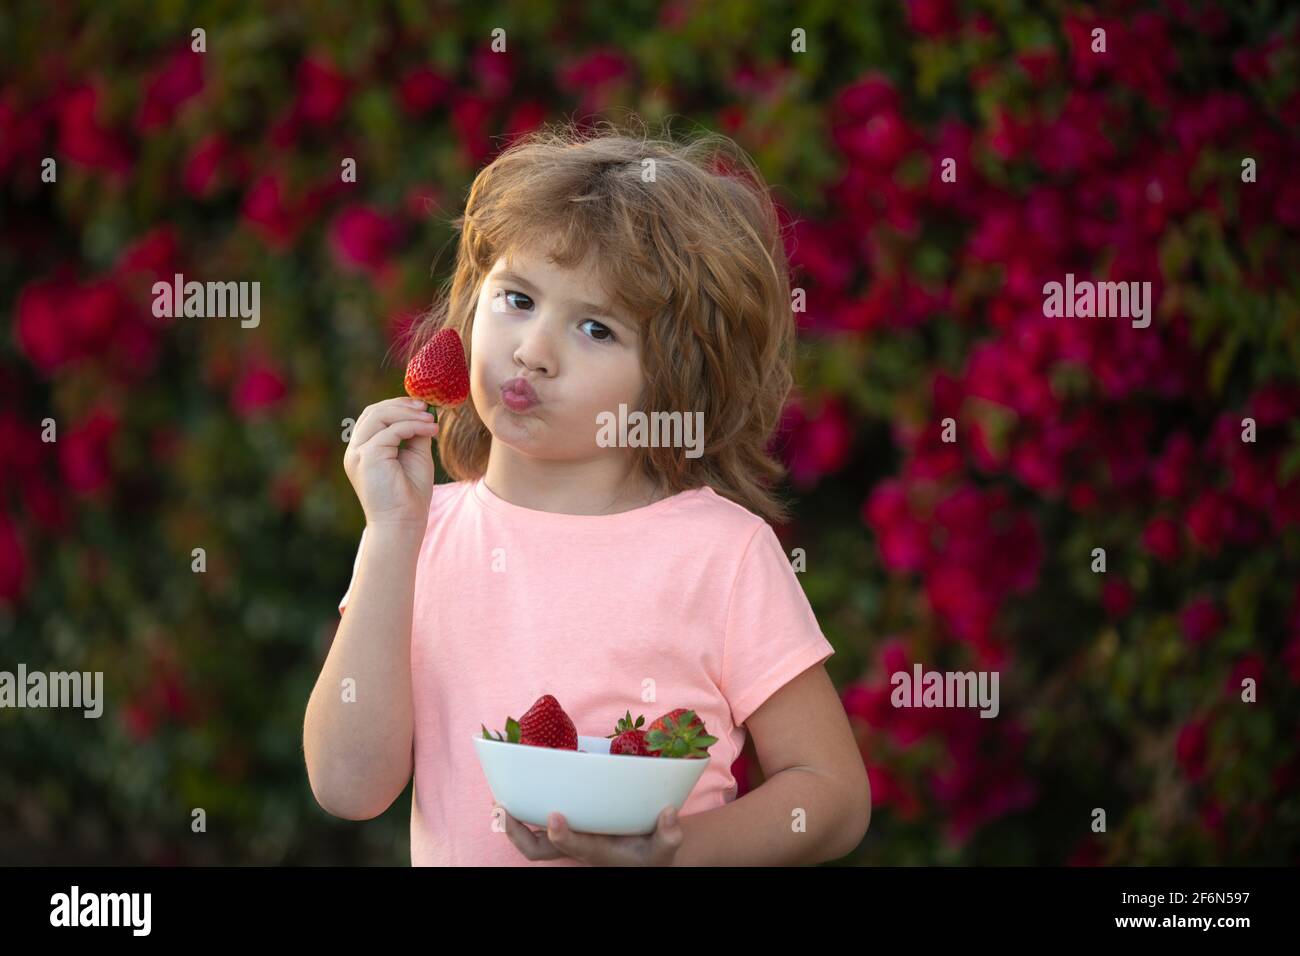 Kids funny face. Cute child eating strawberries. Stock Photo